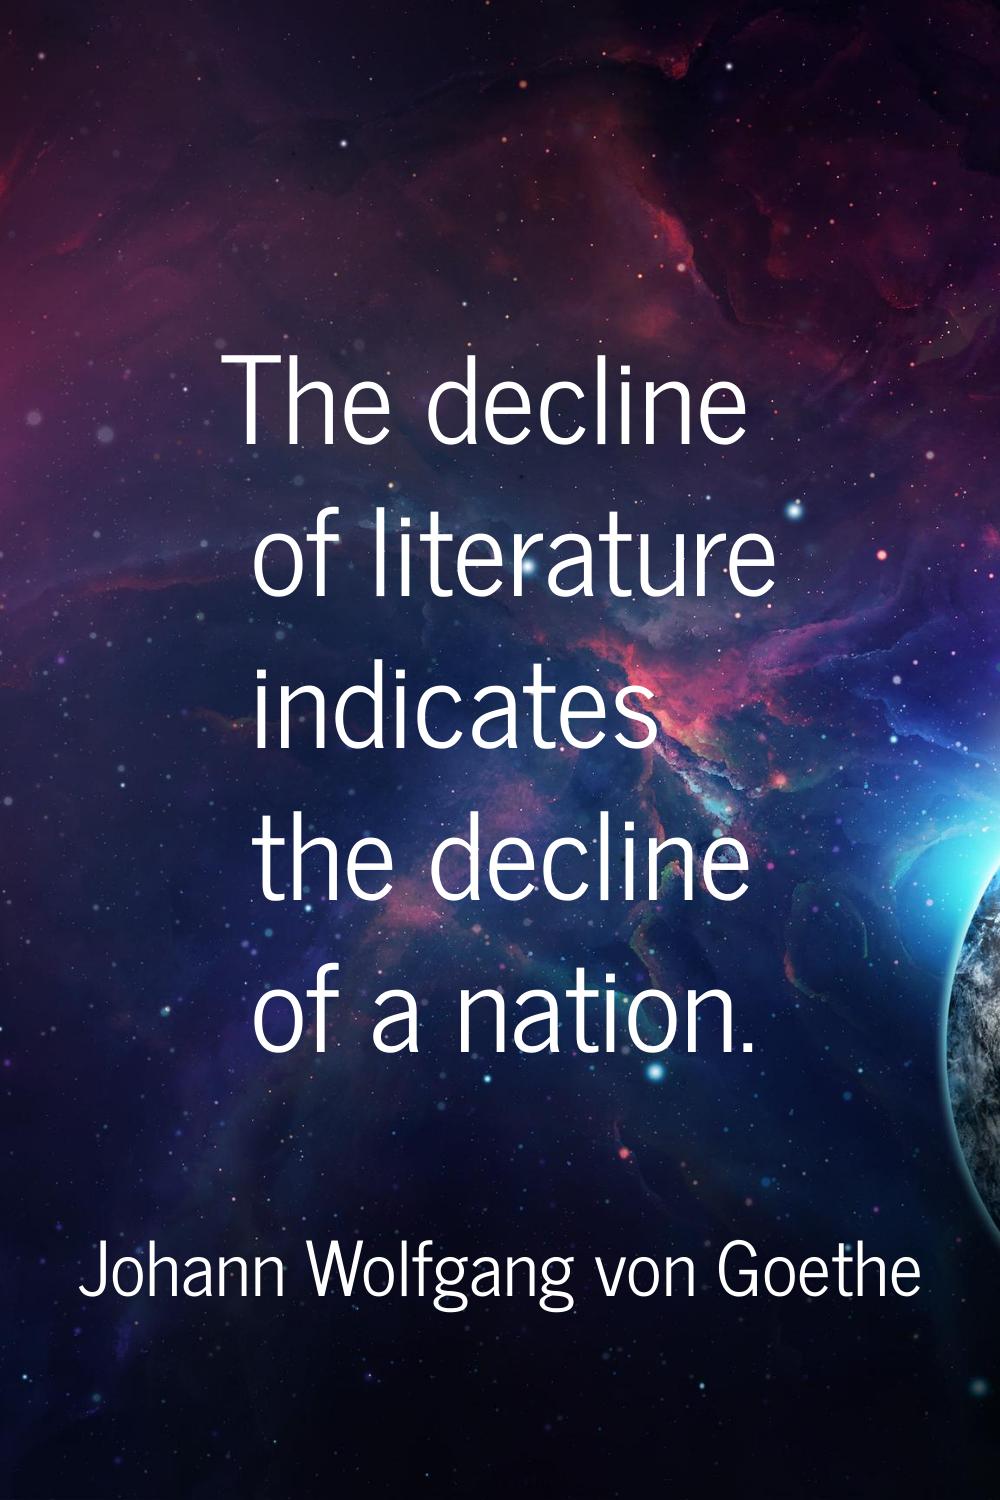 The decline of literature indicates the decline of a nation.